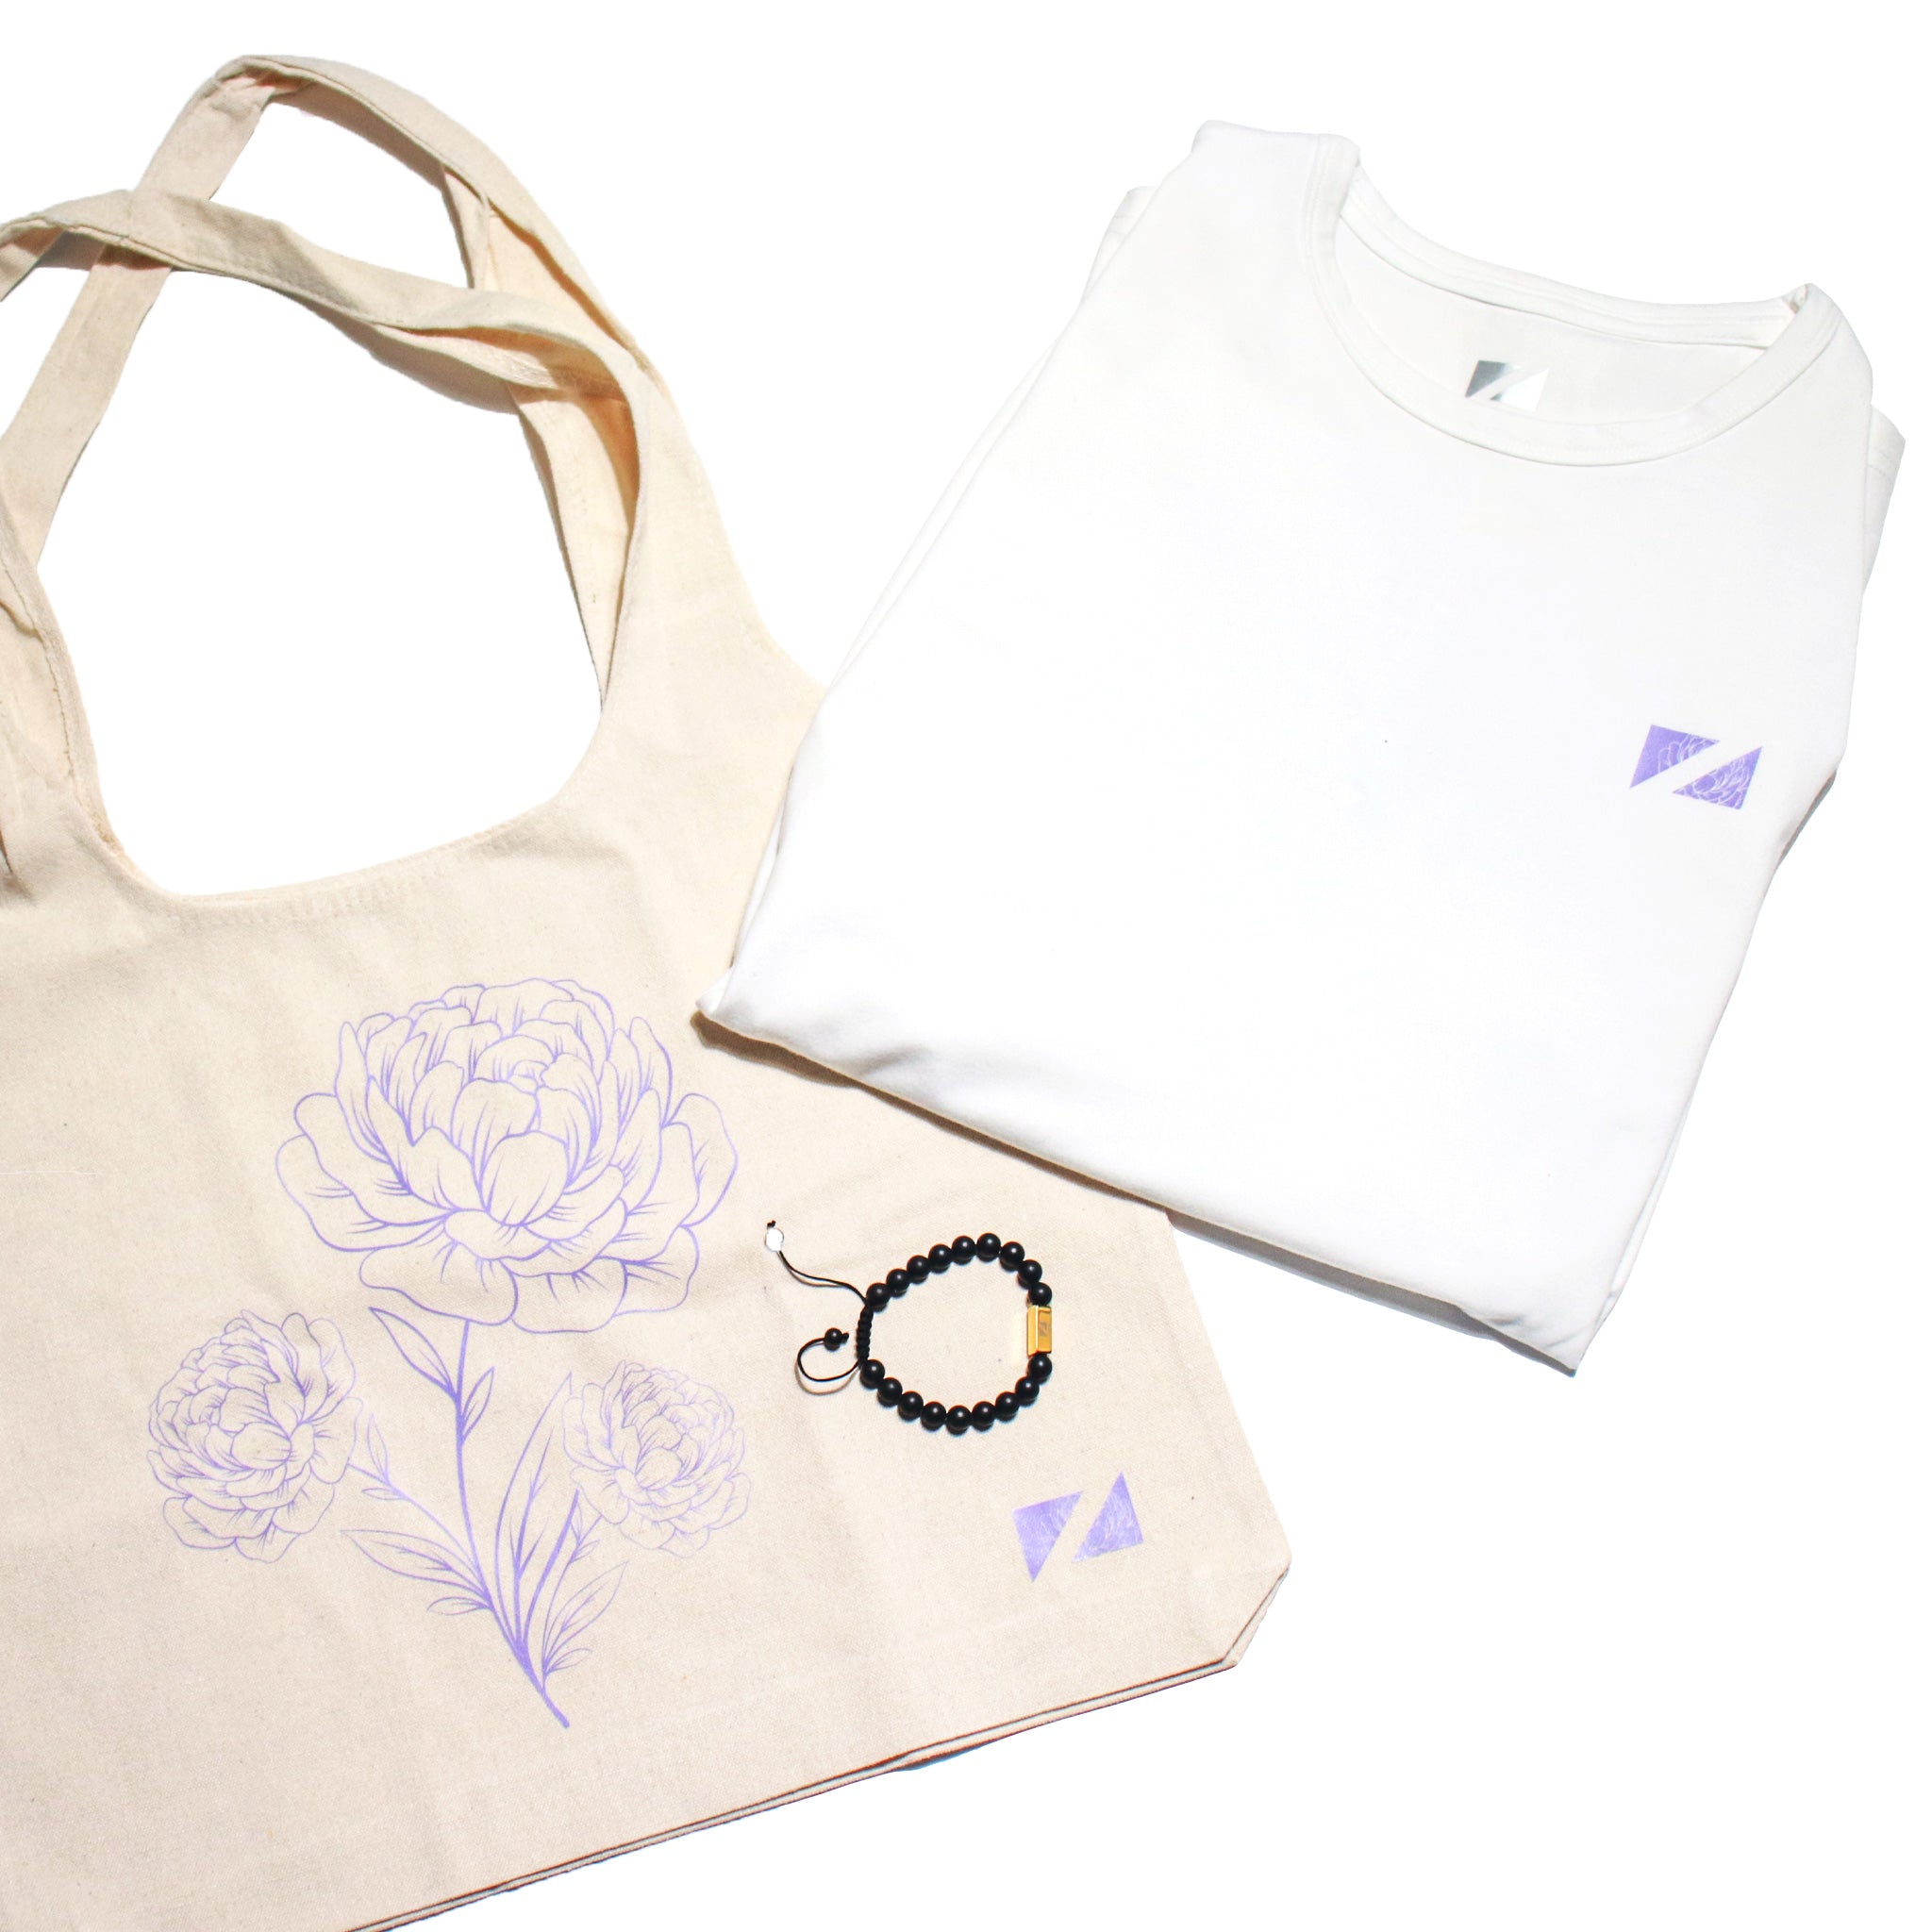 Bundle 2:  The Luxe Carnation Tee, Carnation Tote & Element Bracelet